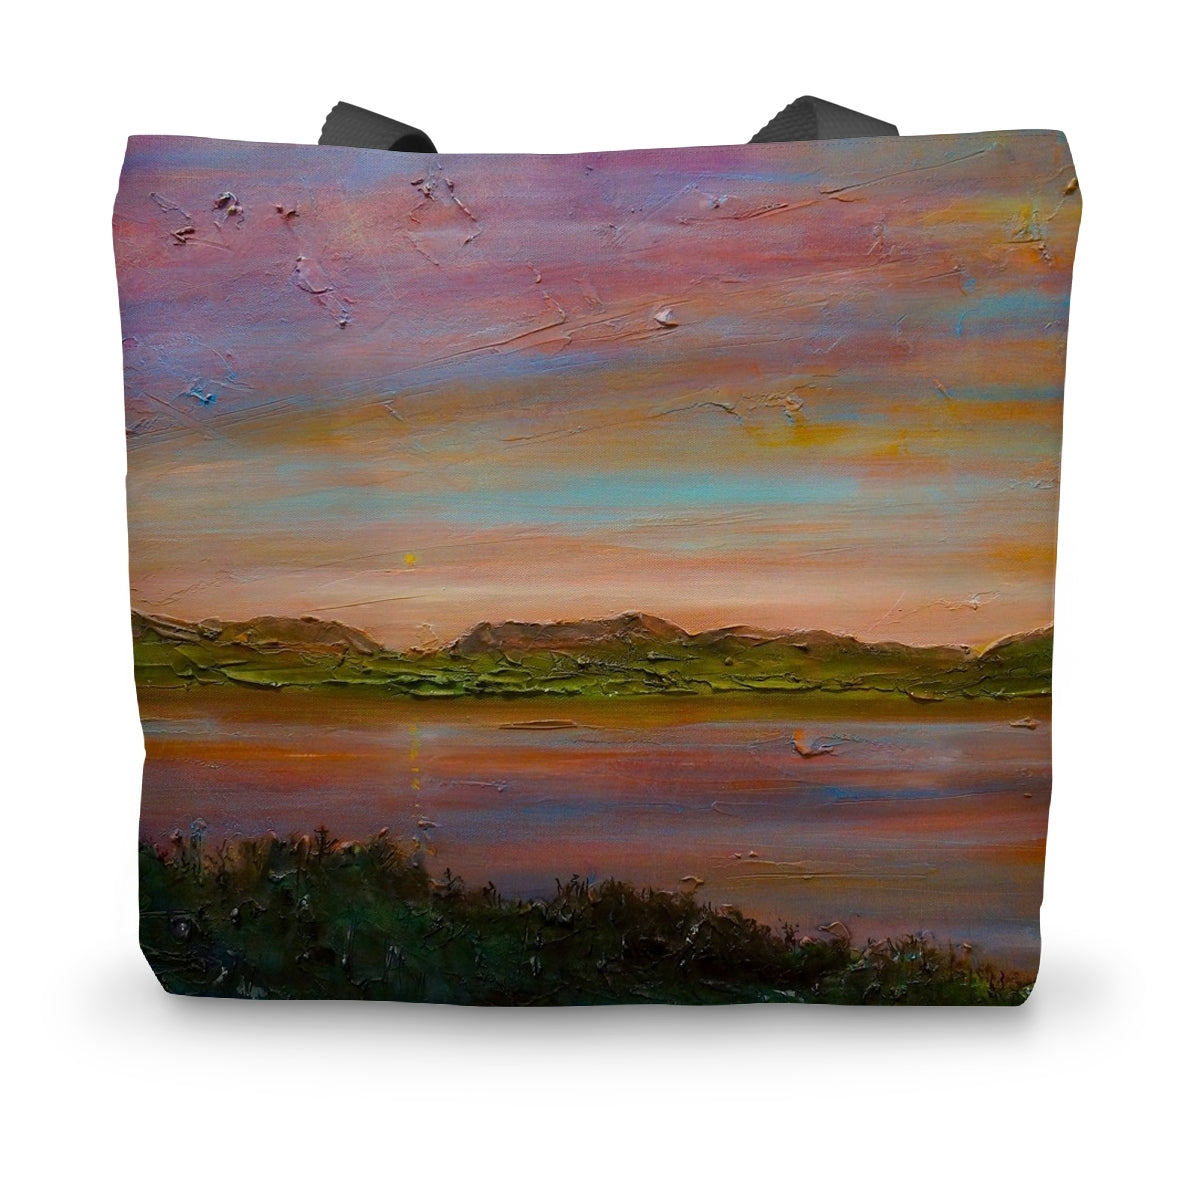 Gourock Golf Club Sunset Art Gifts Canvas Tote Bag-Bags-River Clyde Art Gallery-14"x18.5"-Paintings, Prints, Homeware, Art Gifts From Scotland By Scottish Artist Kevin Hunter